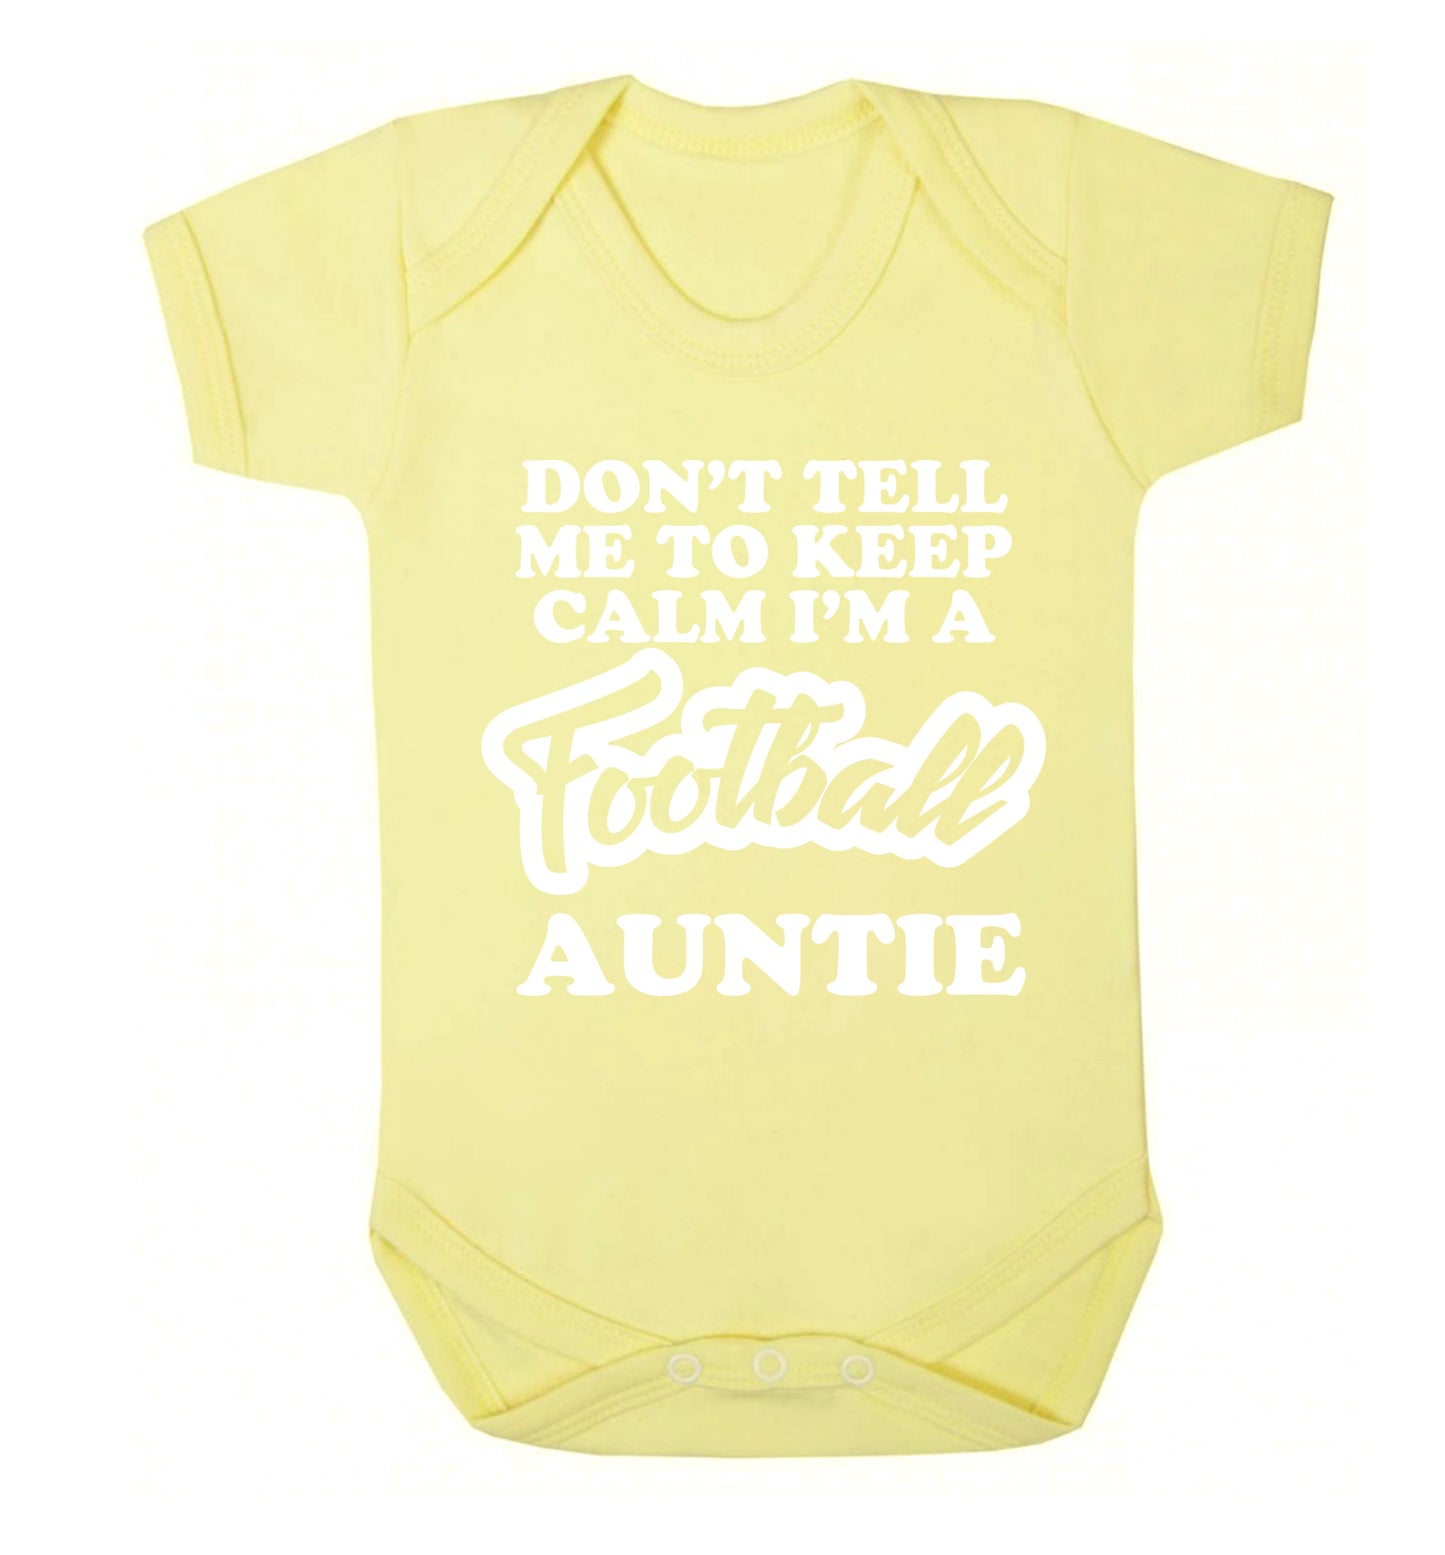 Don't tell me to keep calm I'm a football auntie Baby Vest pale yellow 18-24 months